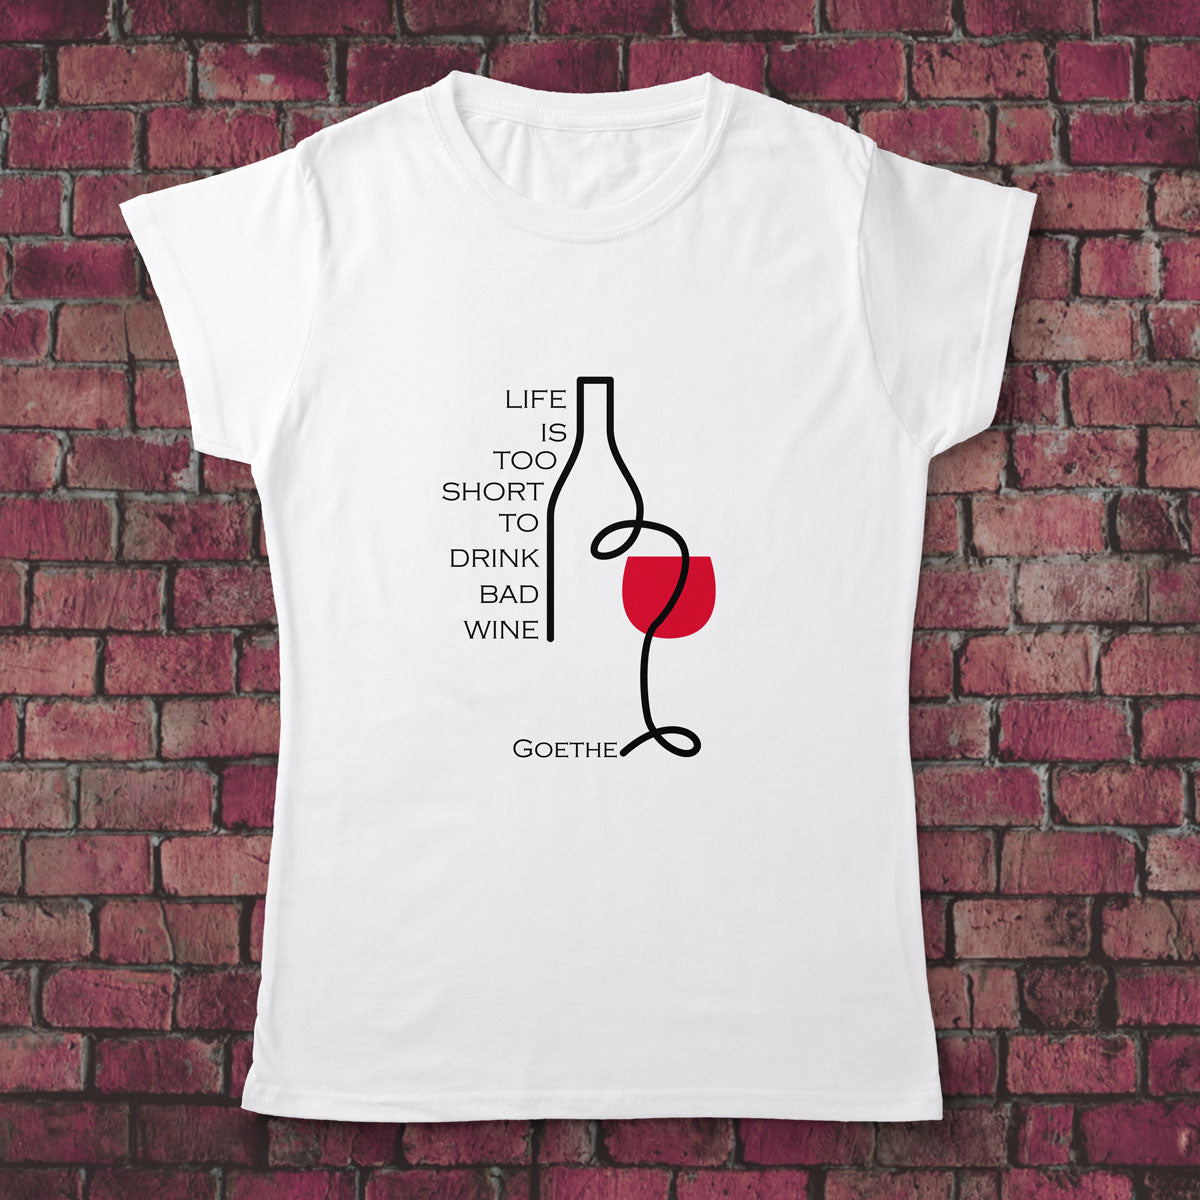 Life is too short to drink bad wine - Goethe - T-Shirt bianca Donna